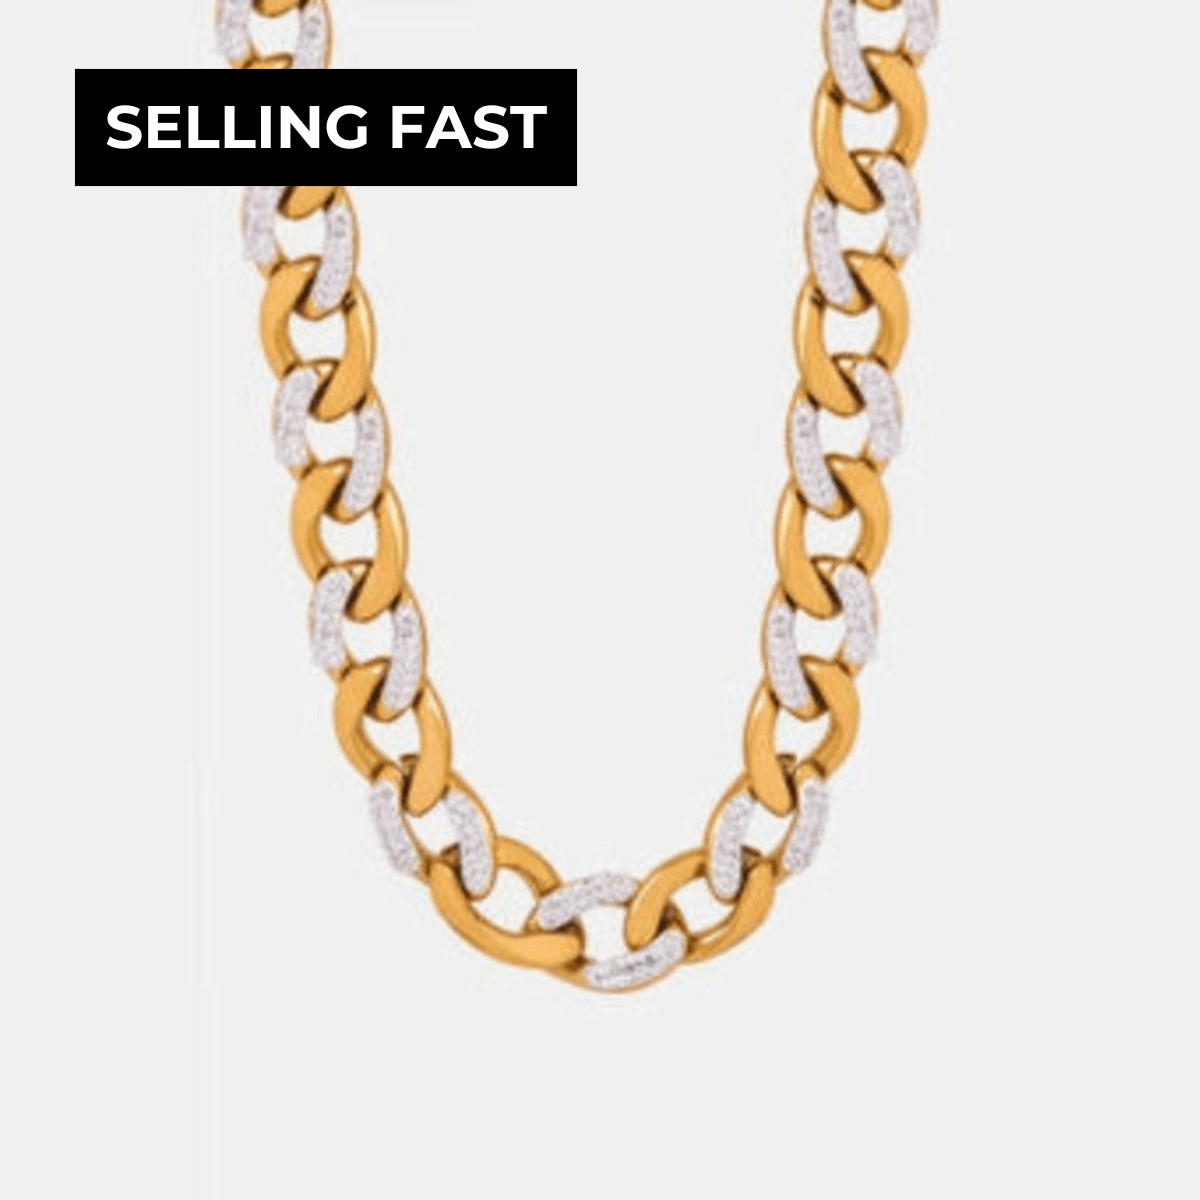 1# BEST Women's Gold Diamond Chunky Chain Necklace for Women, #1 Best Most Top Trendy Trending Gold Diamond Chunky Chain Necklace for Women Gift, Mason & Madison Co.